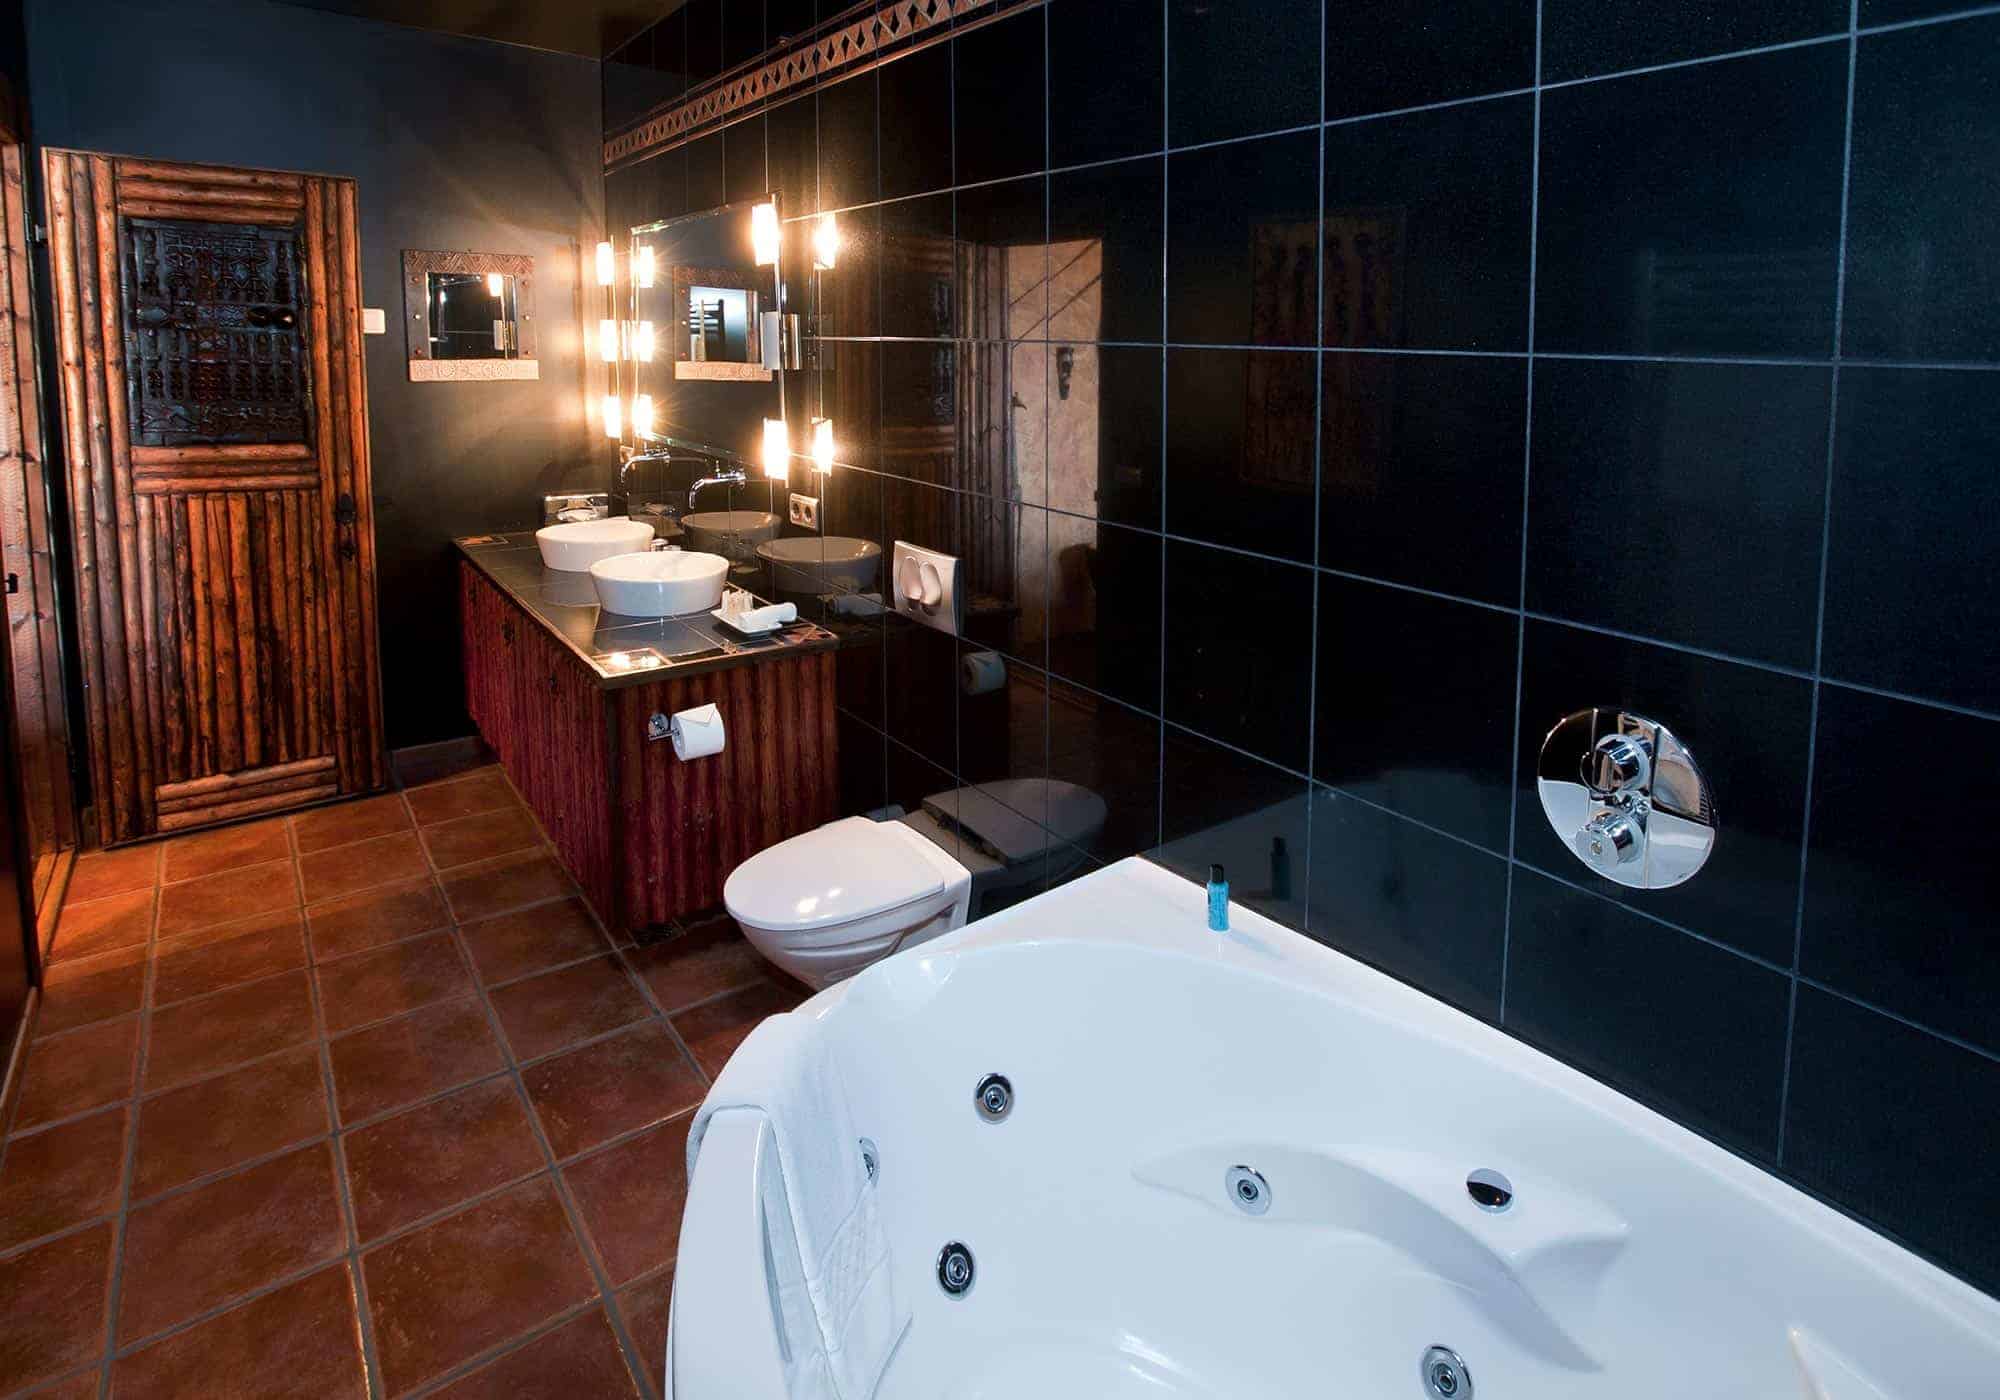 Bathroom in Hotel Rangá's Africa Master Suite decorated with black wall tile and large bathtub.